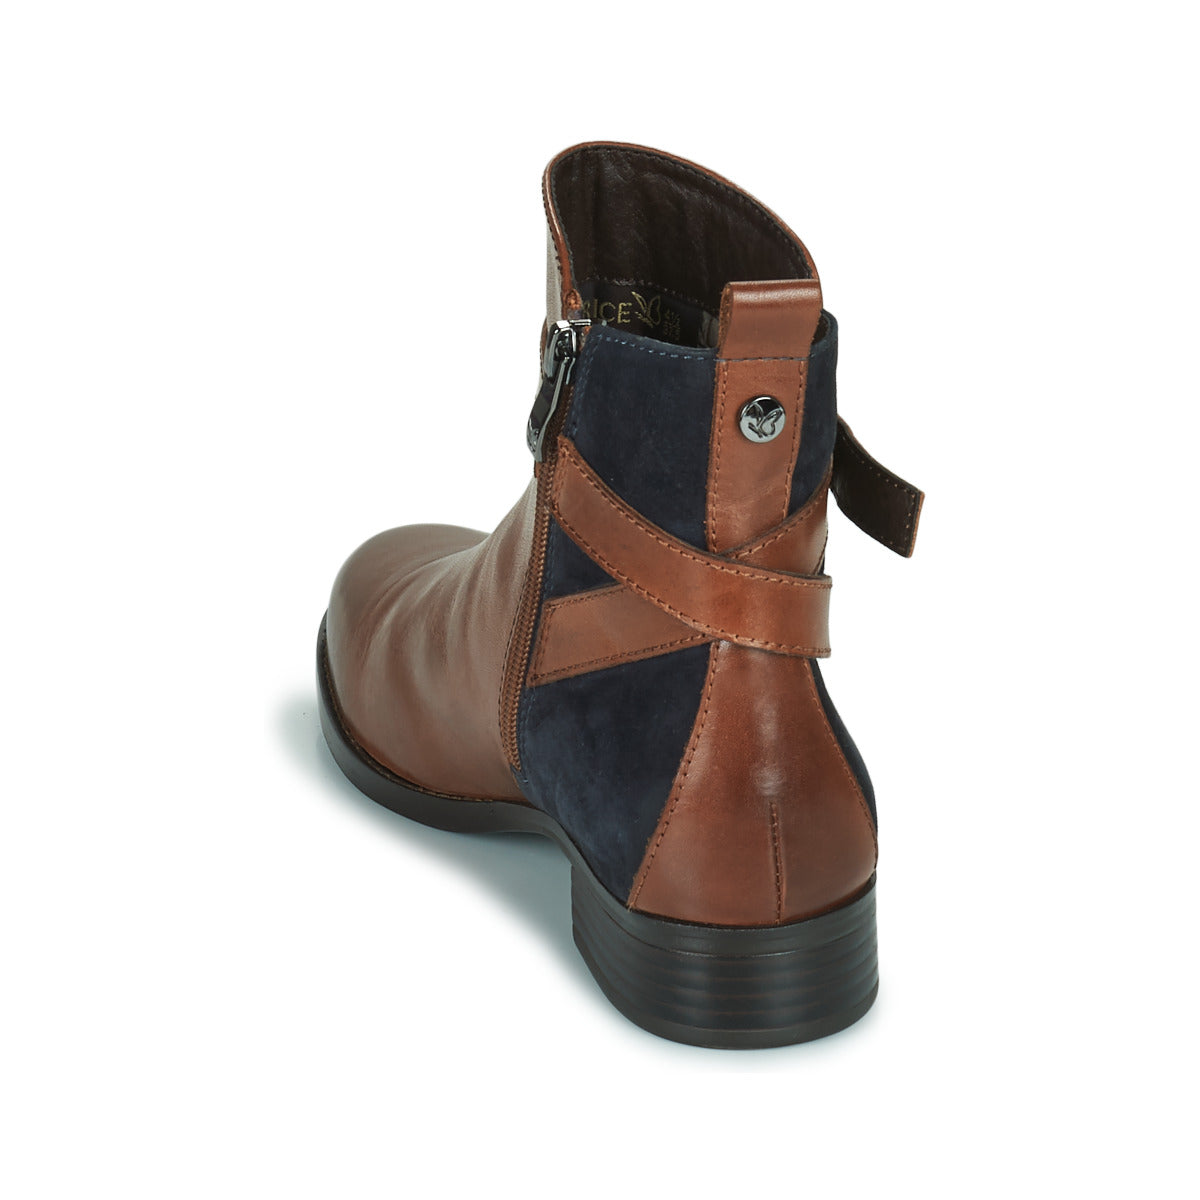 Caprice Cognac Leather/Navy Suede Ankle Boot